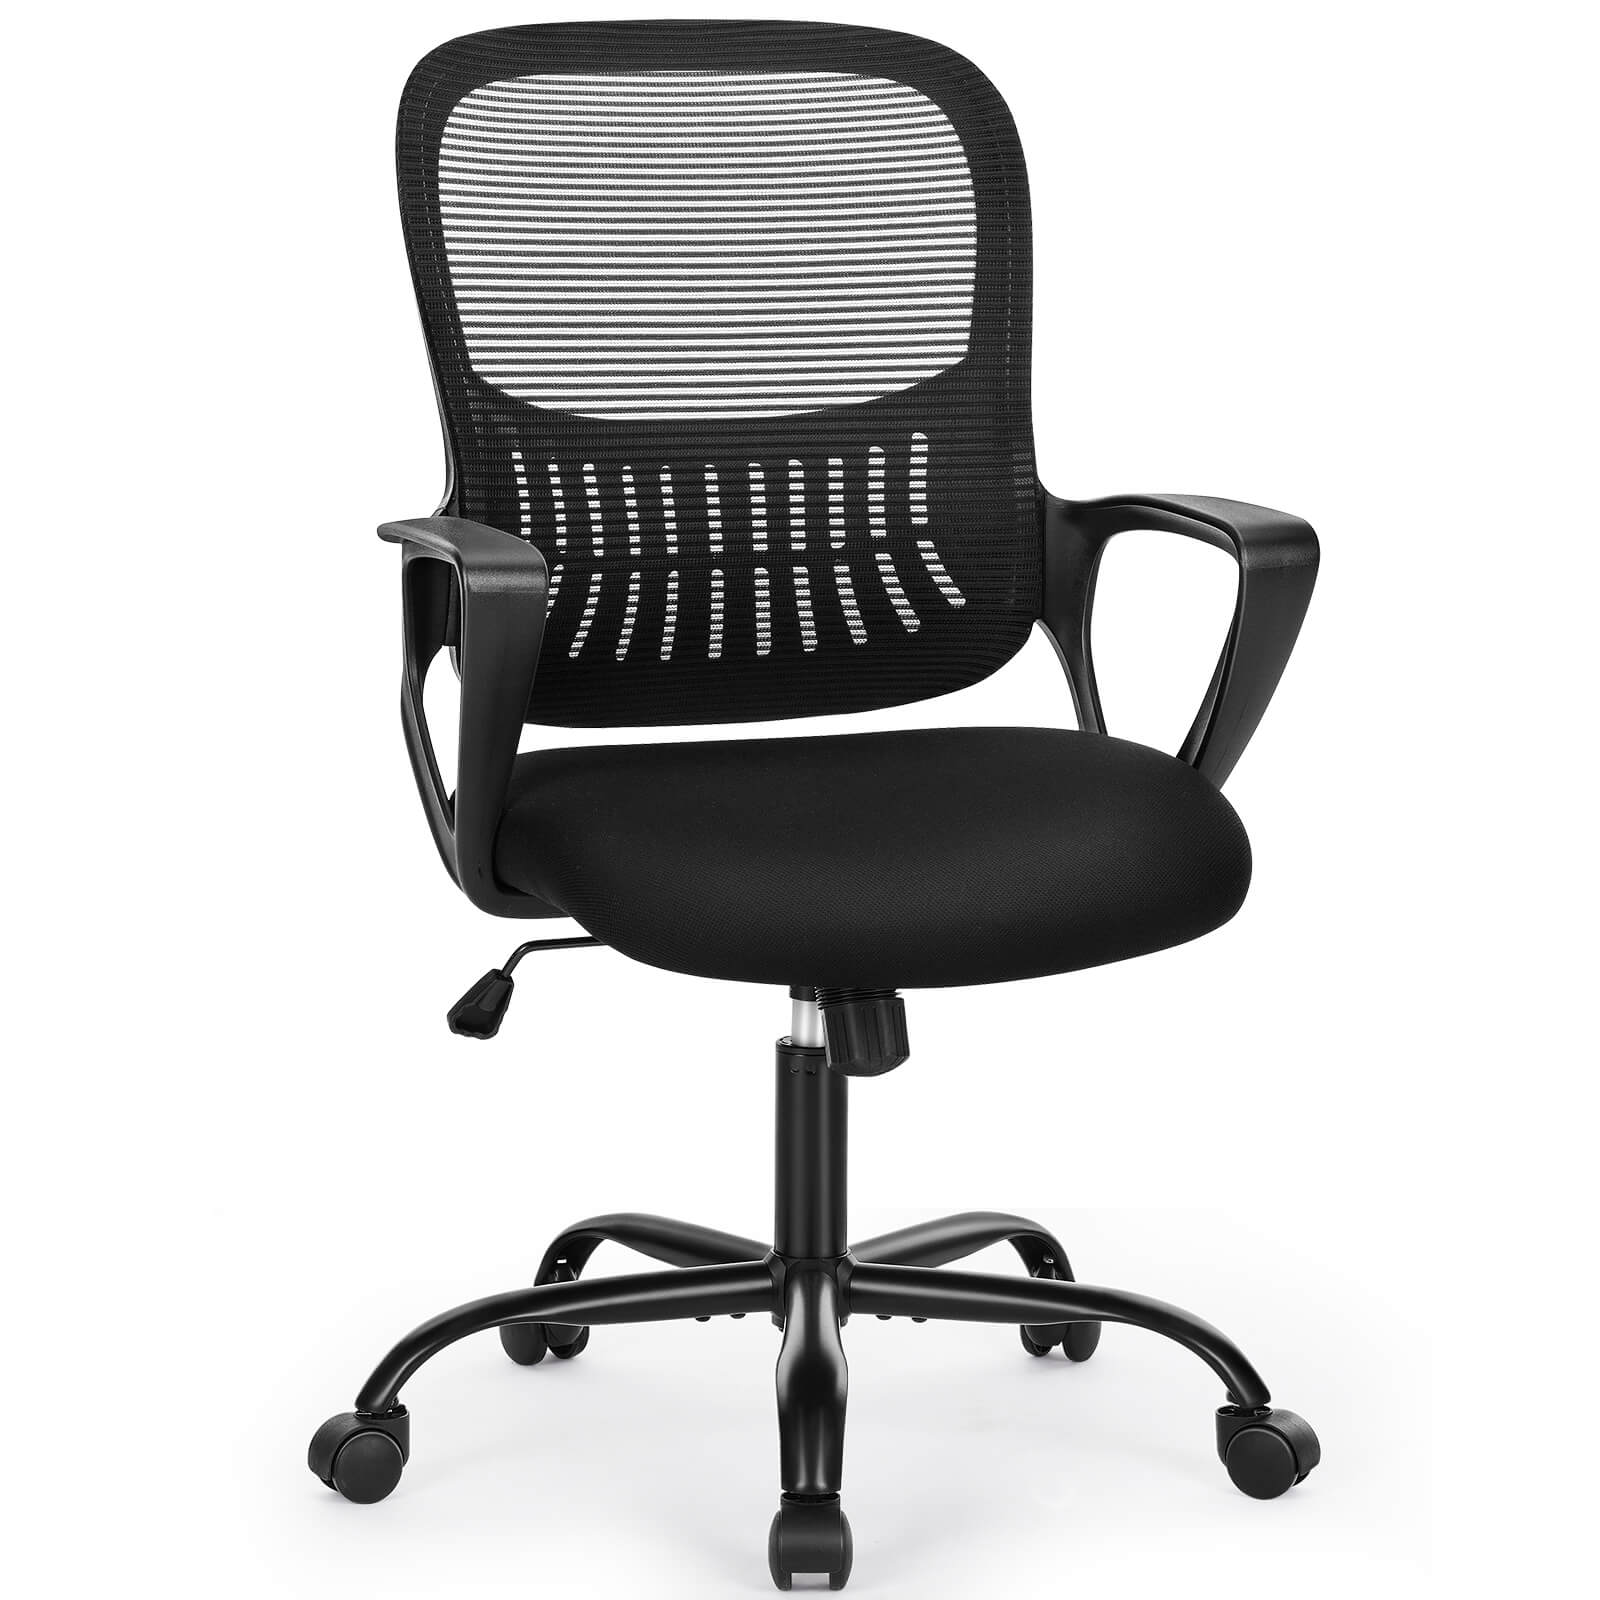 Office chair, ergonomic, adjustable height, with lumbar support and armrests, suitable for home, office.